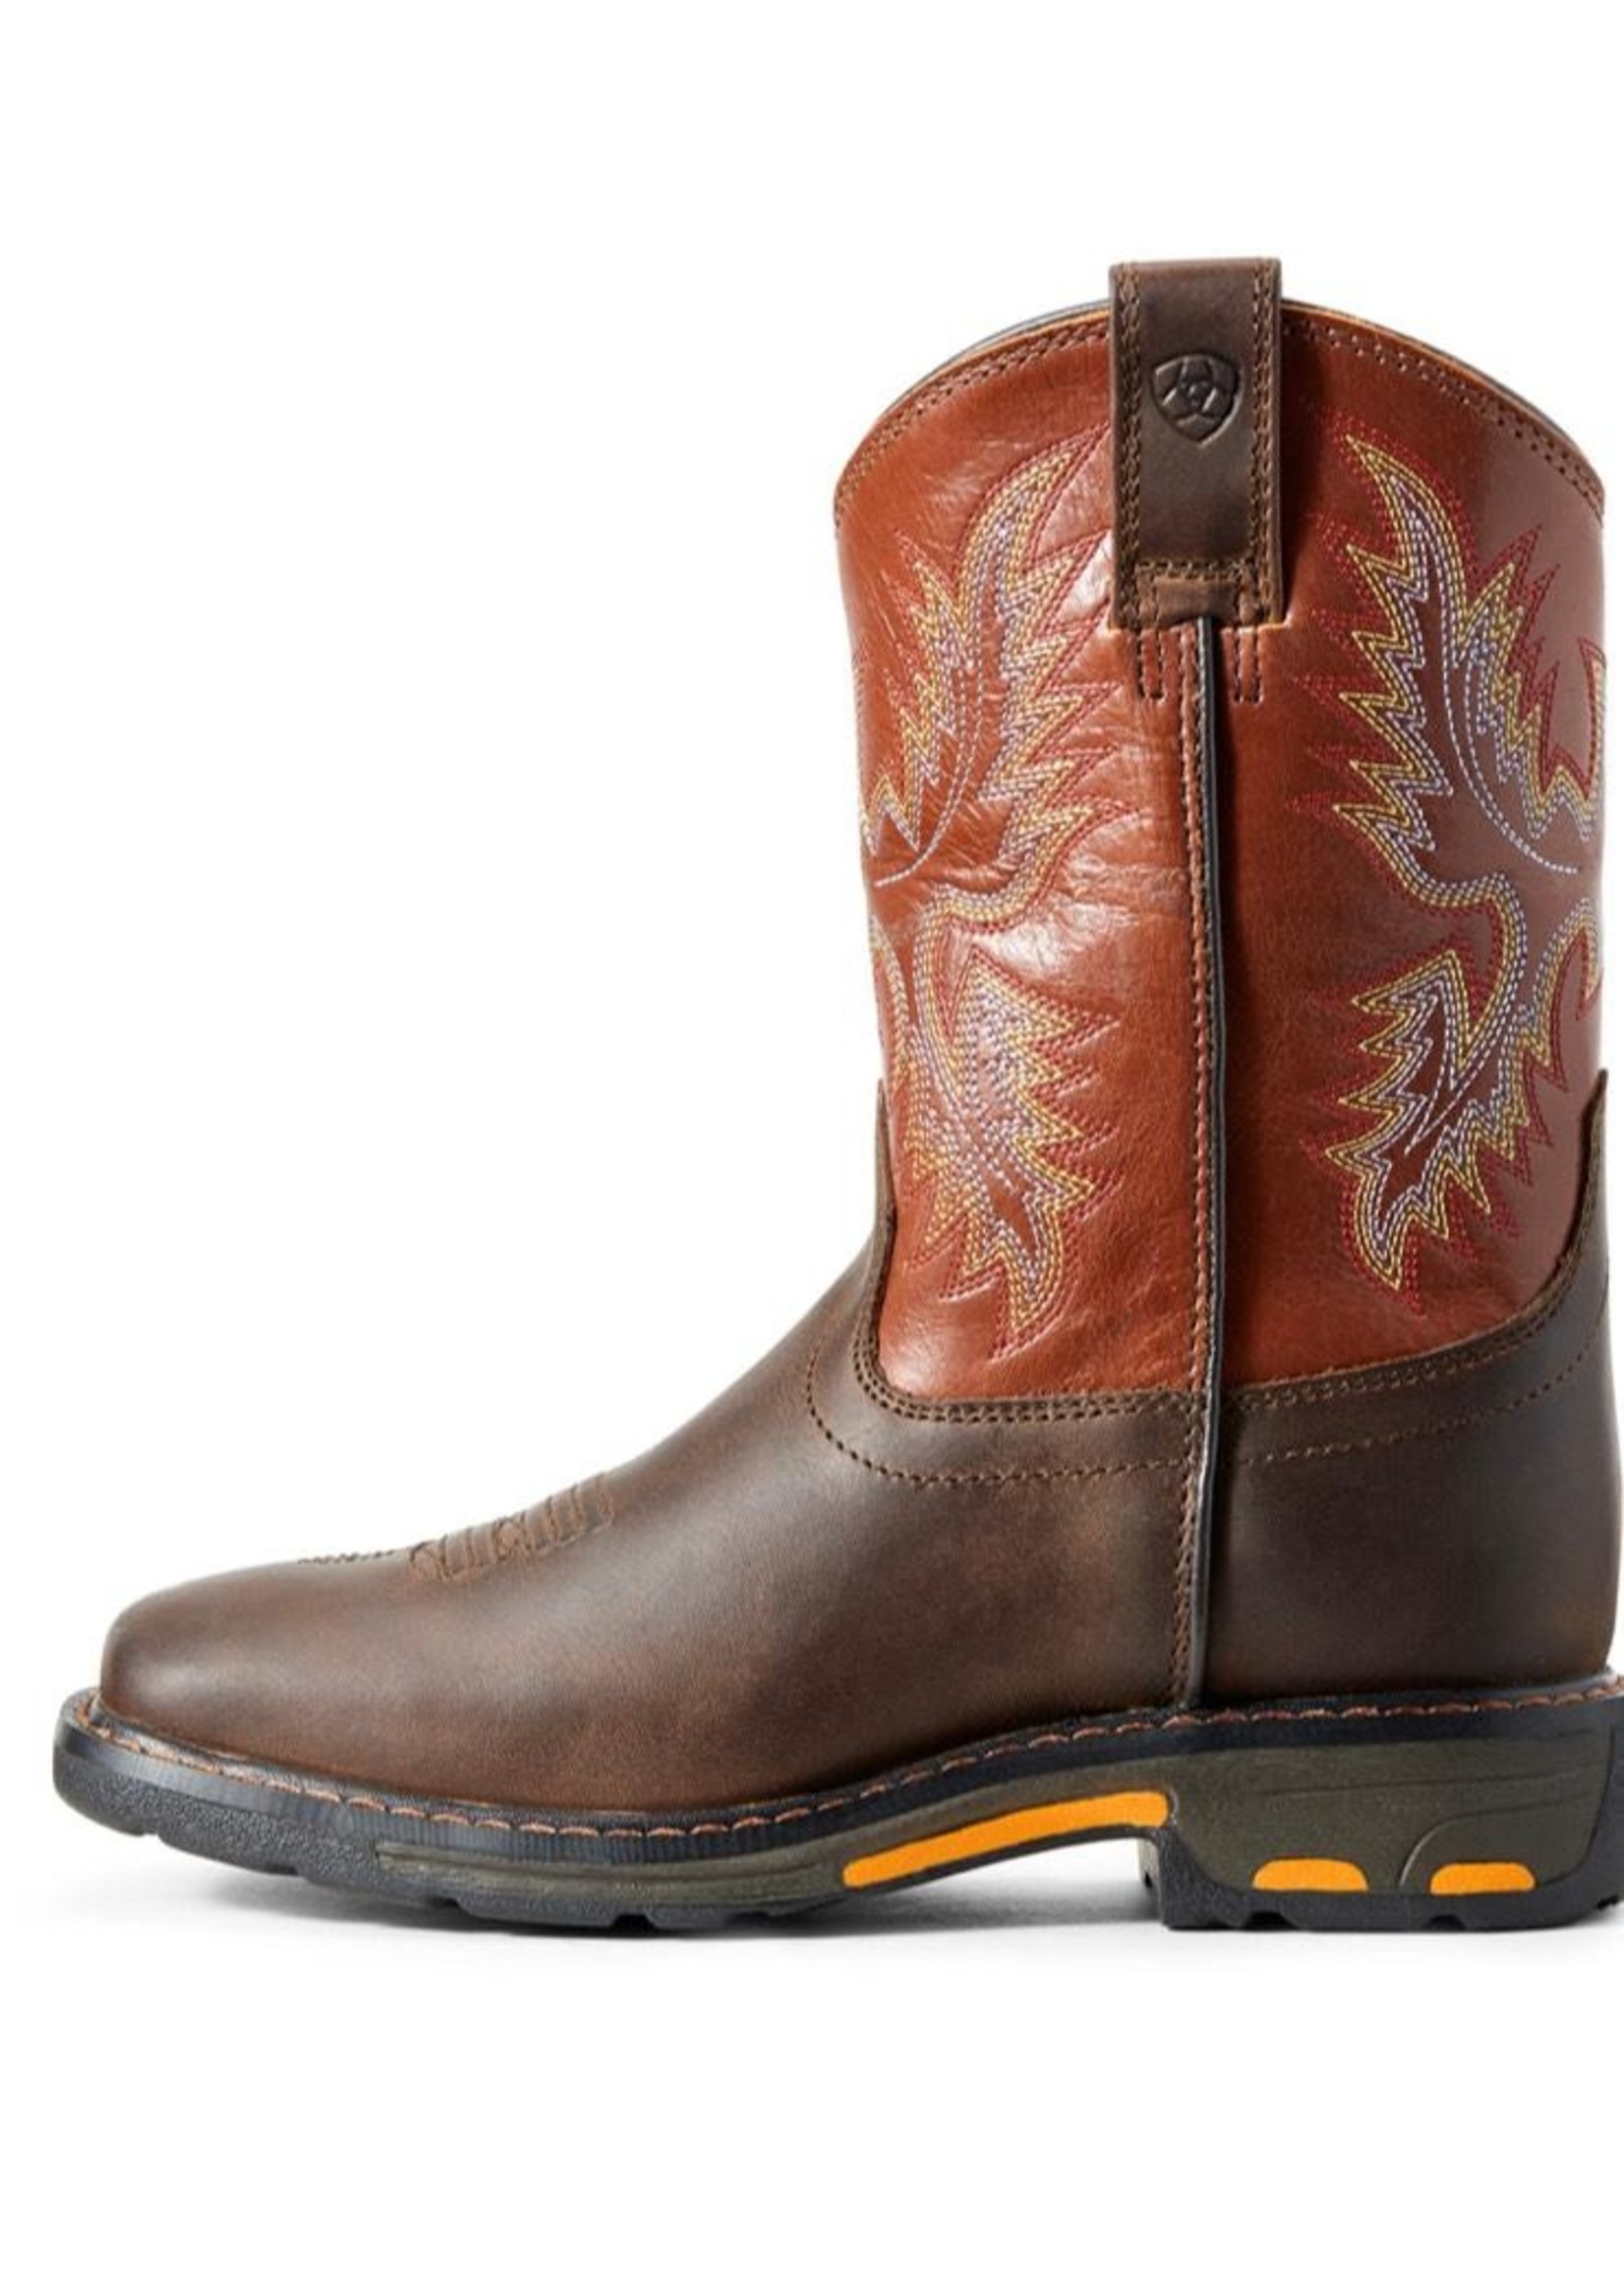 Ariat WorkHog Wide Square Toe Youth Boot